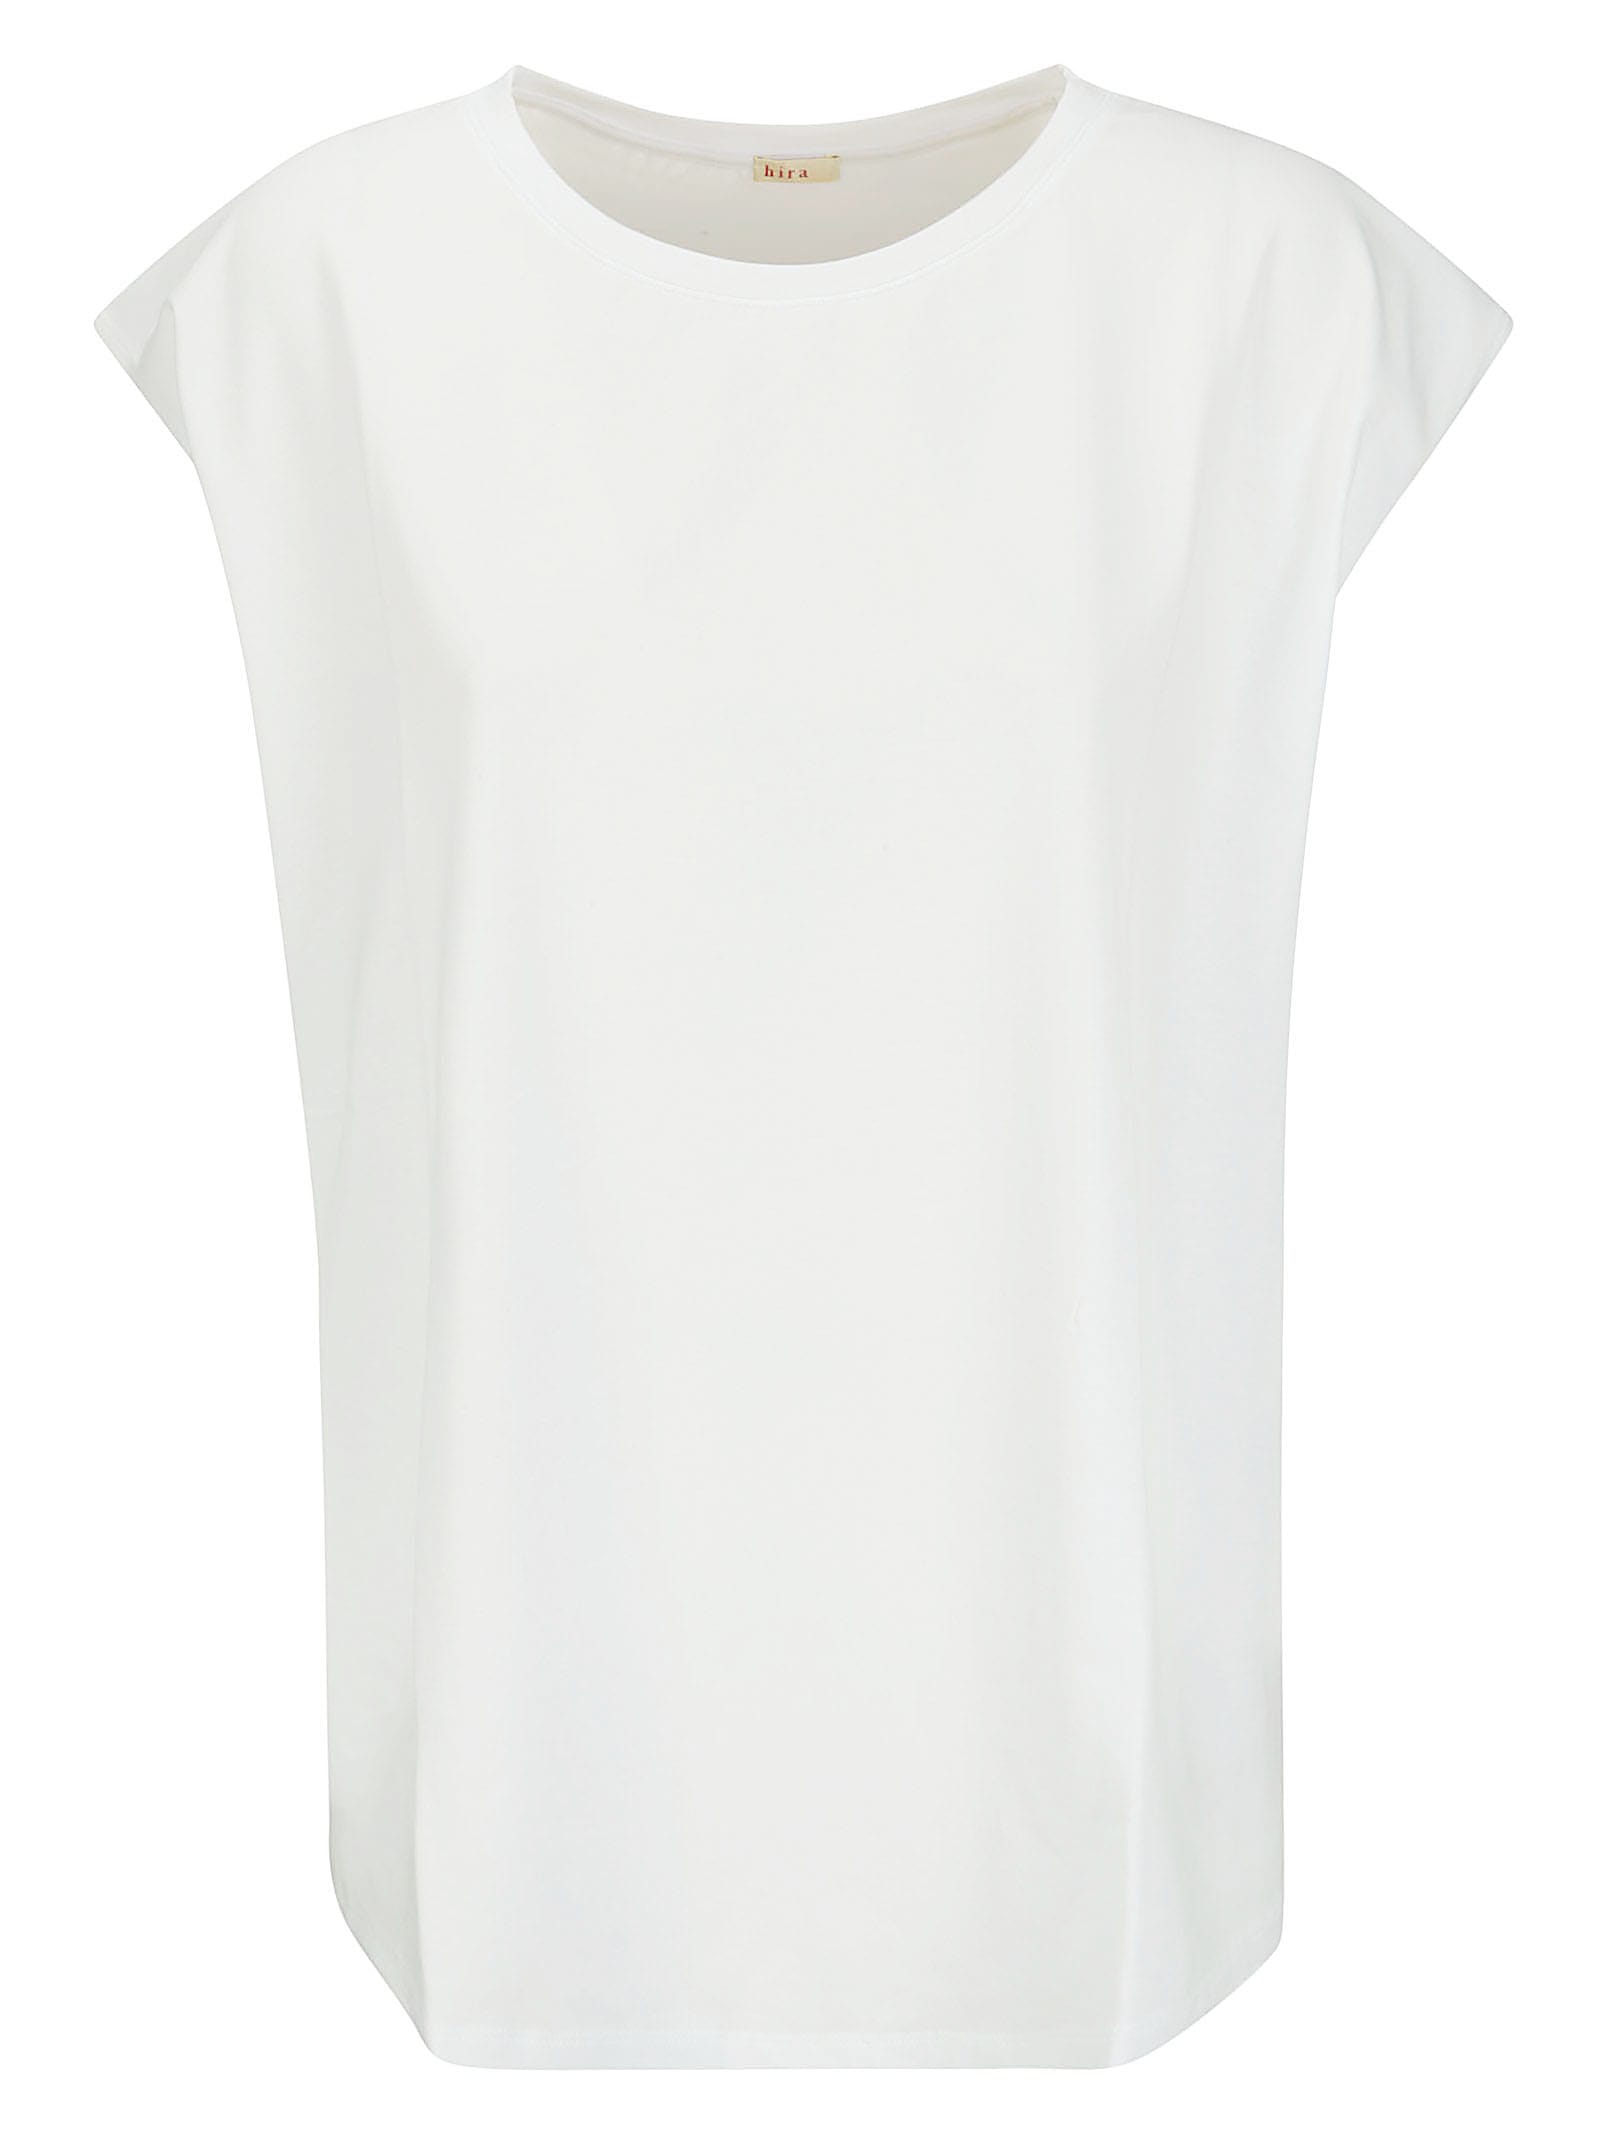 Hira Overall Cotton T-shirt In White